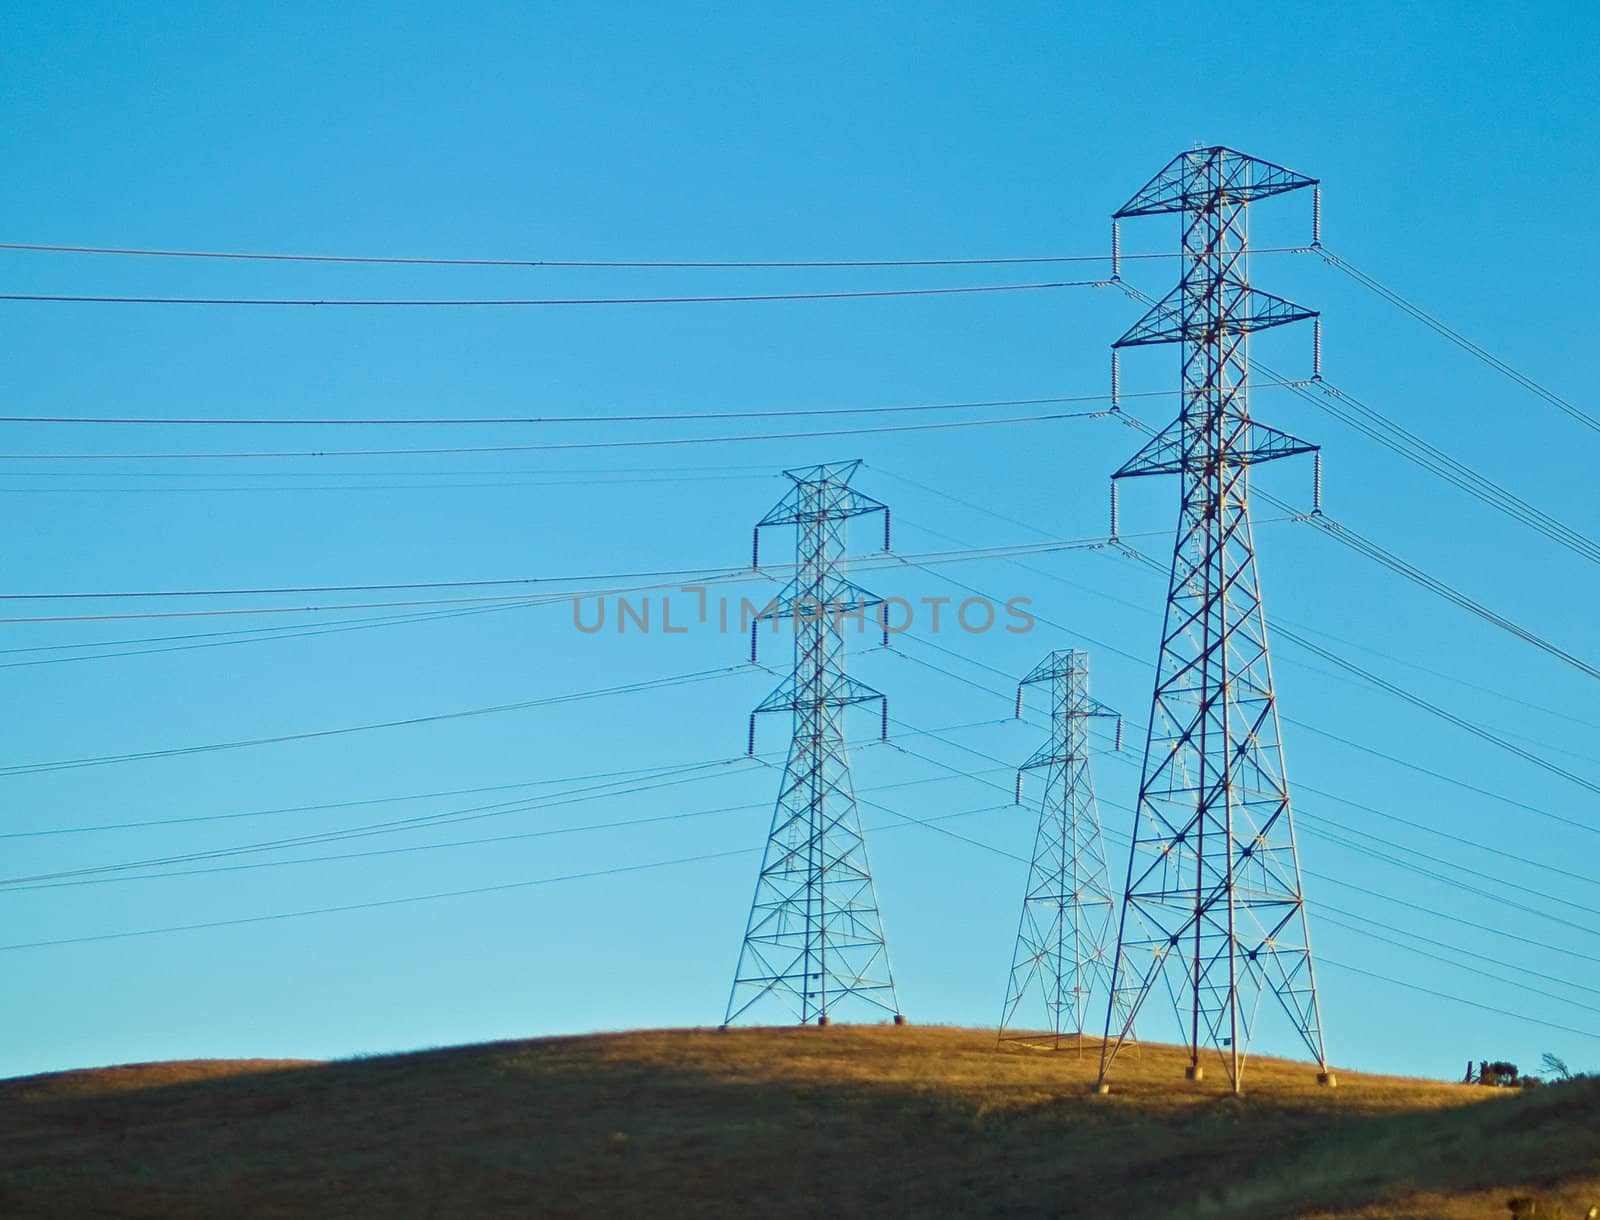 Electrical Powerlines on a Hill before a Blue Sky by Frankljunior